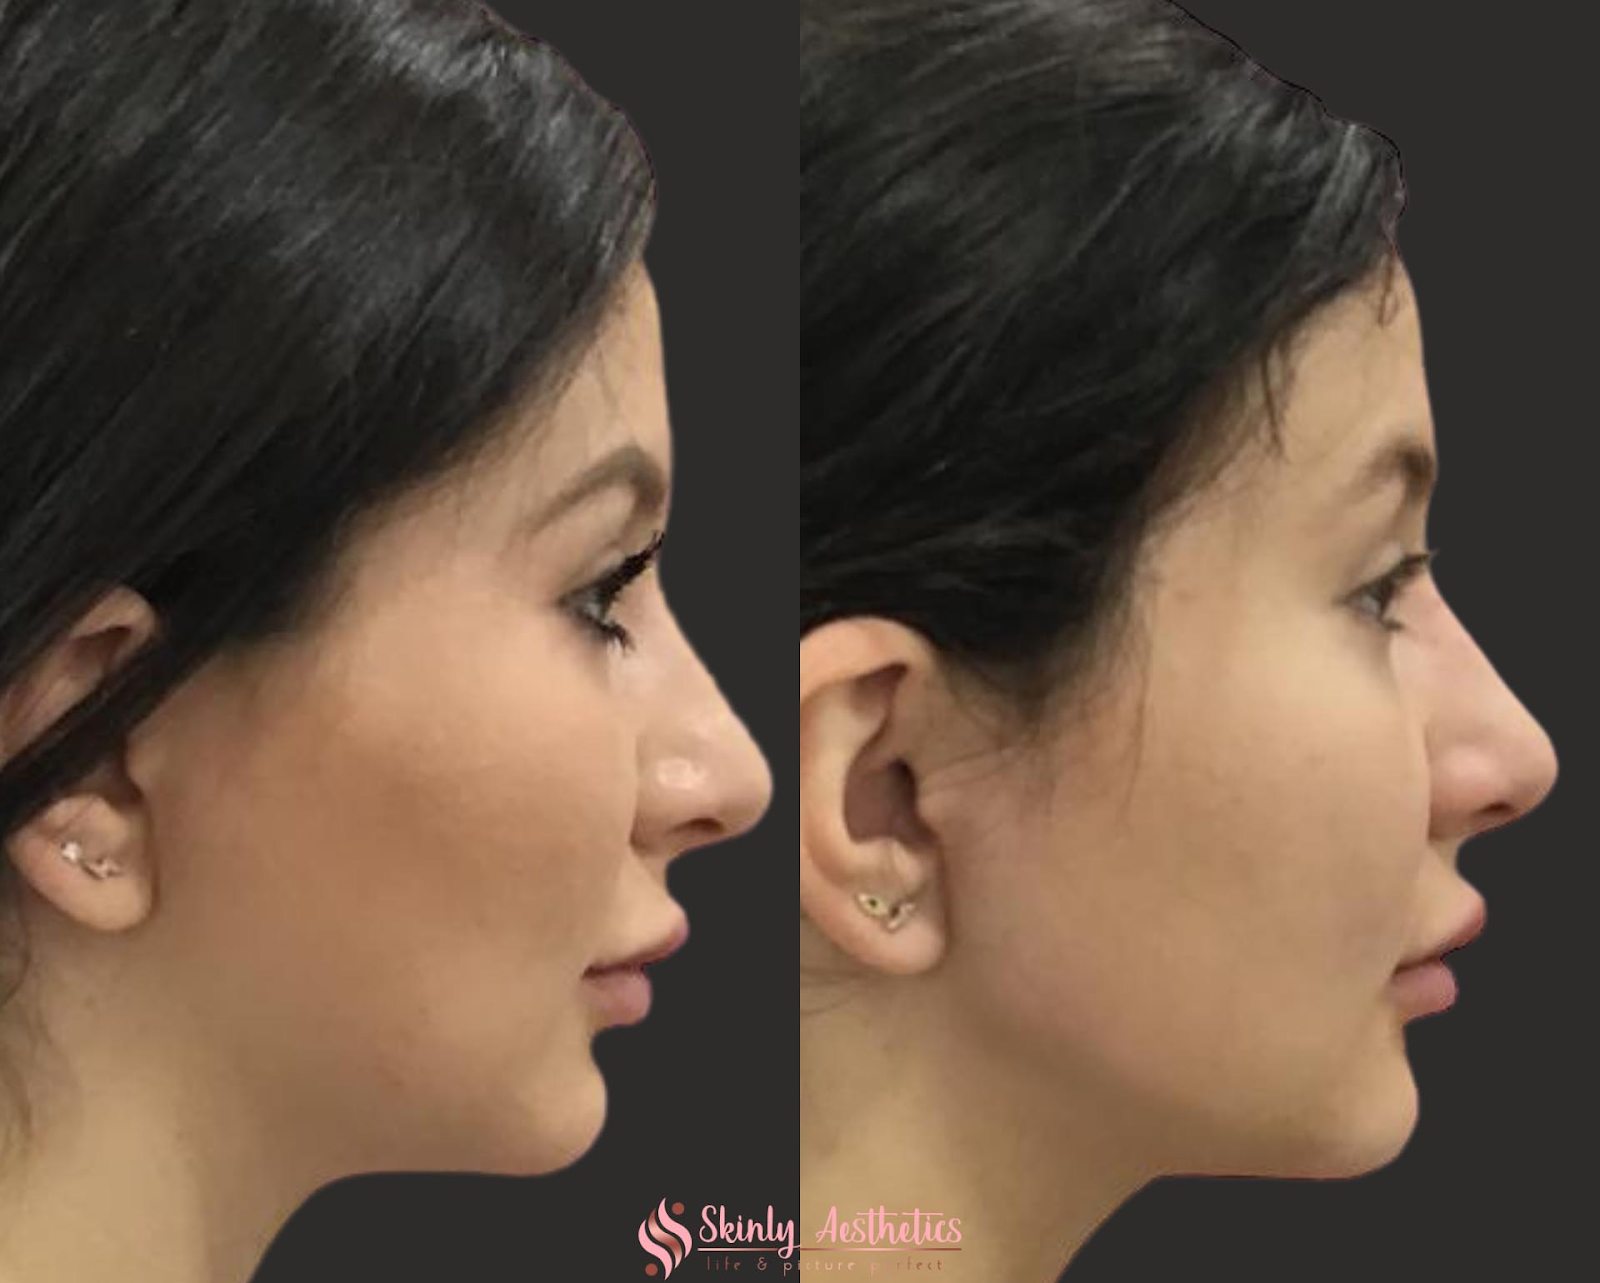 Before and after using combination treatments including Radiesse to enhance the jawline.